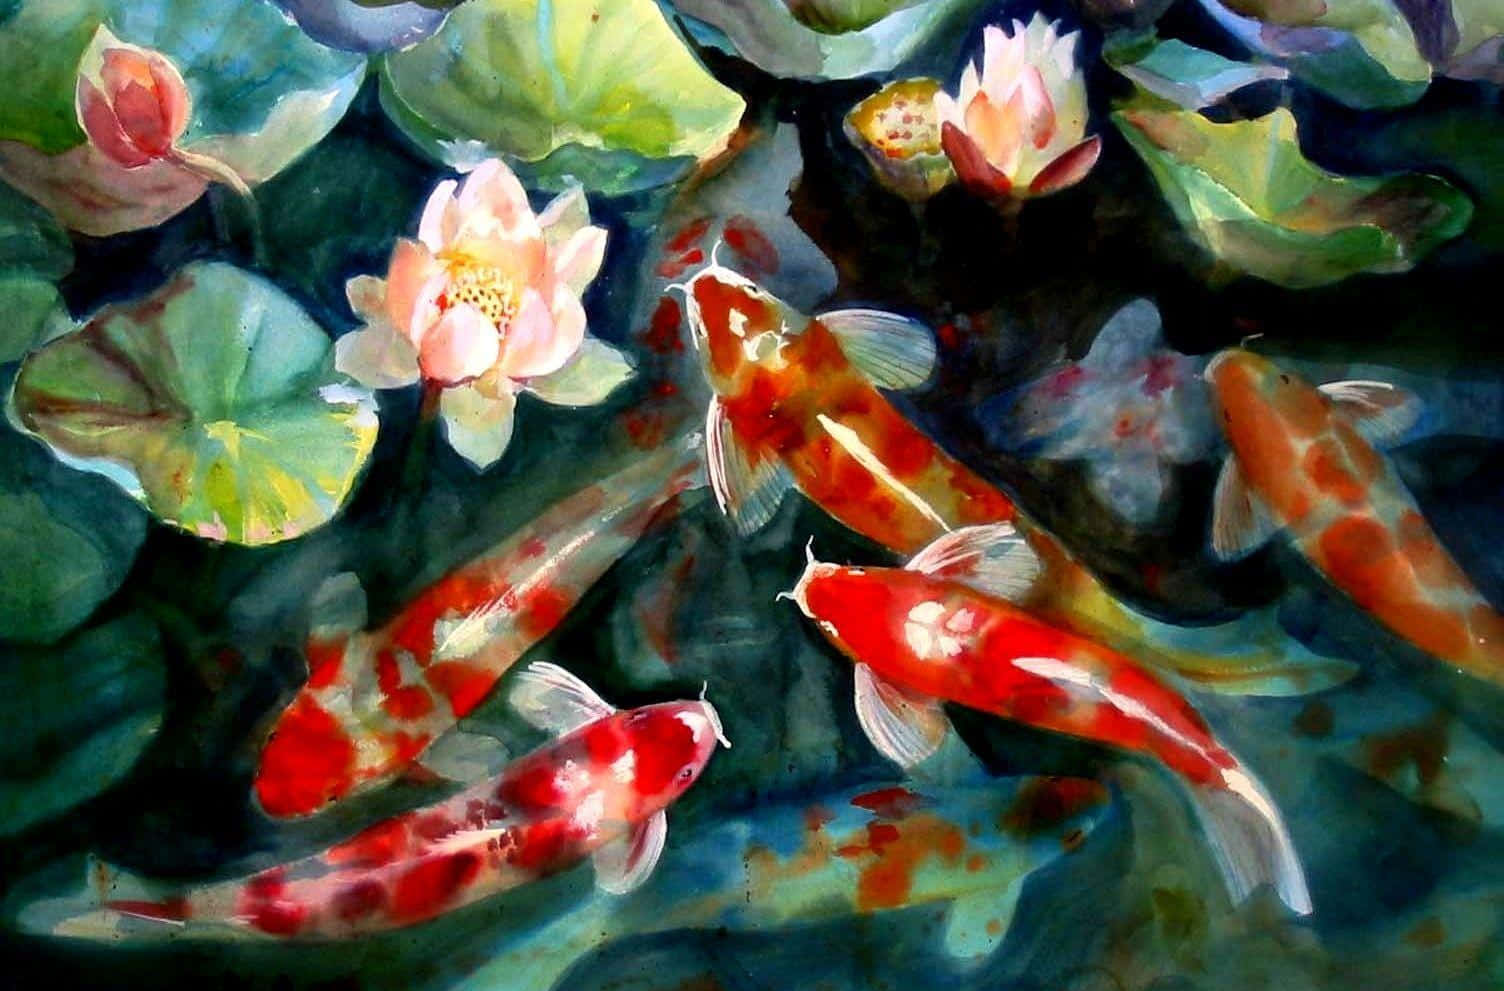 Caption: Graceful Koi Fish Swimming in a Serene Pond